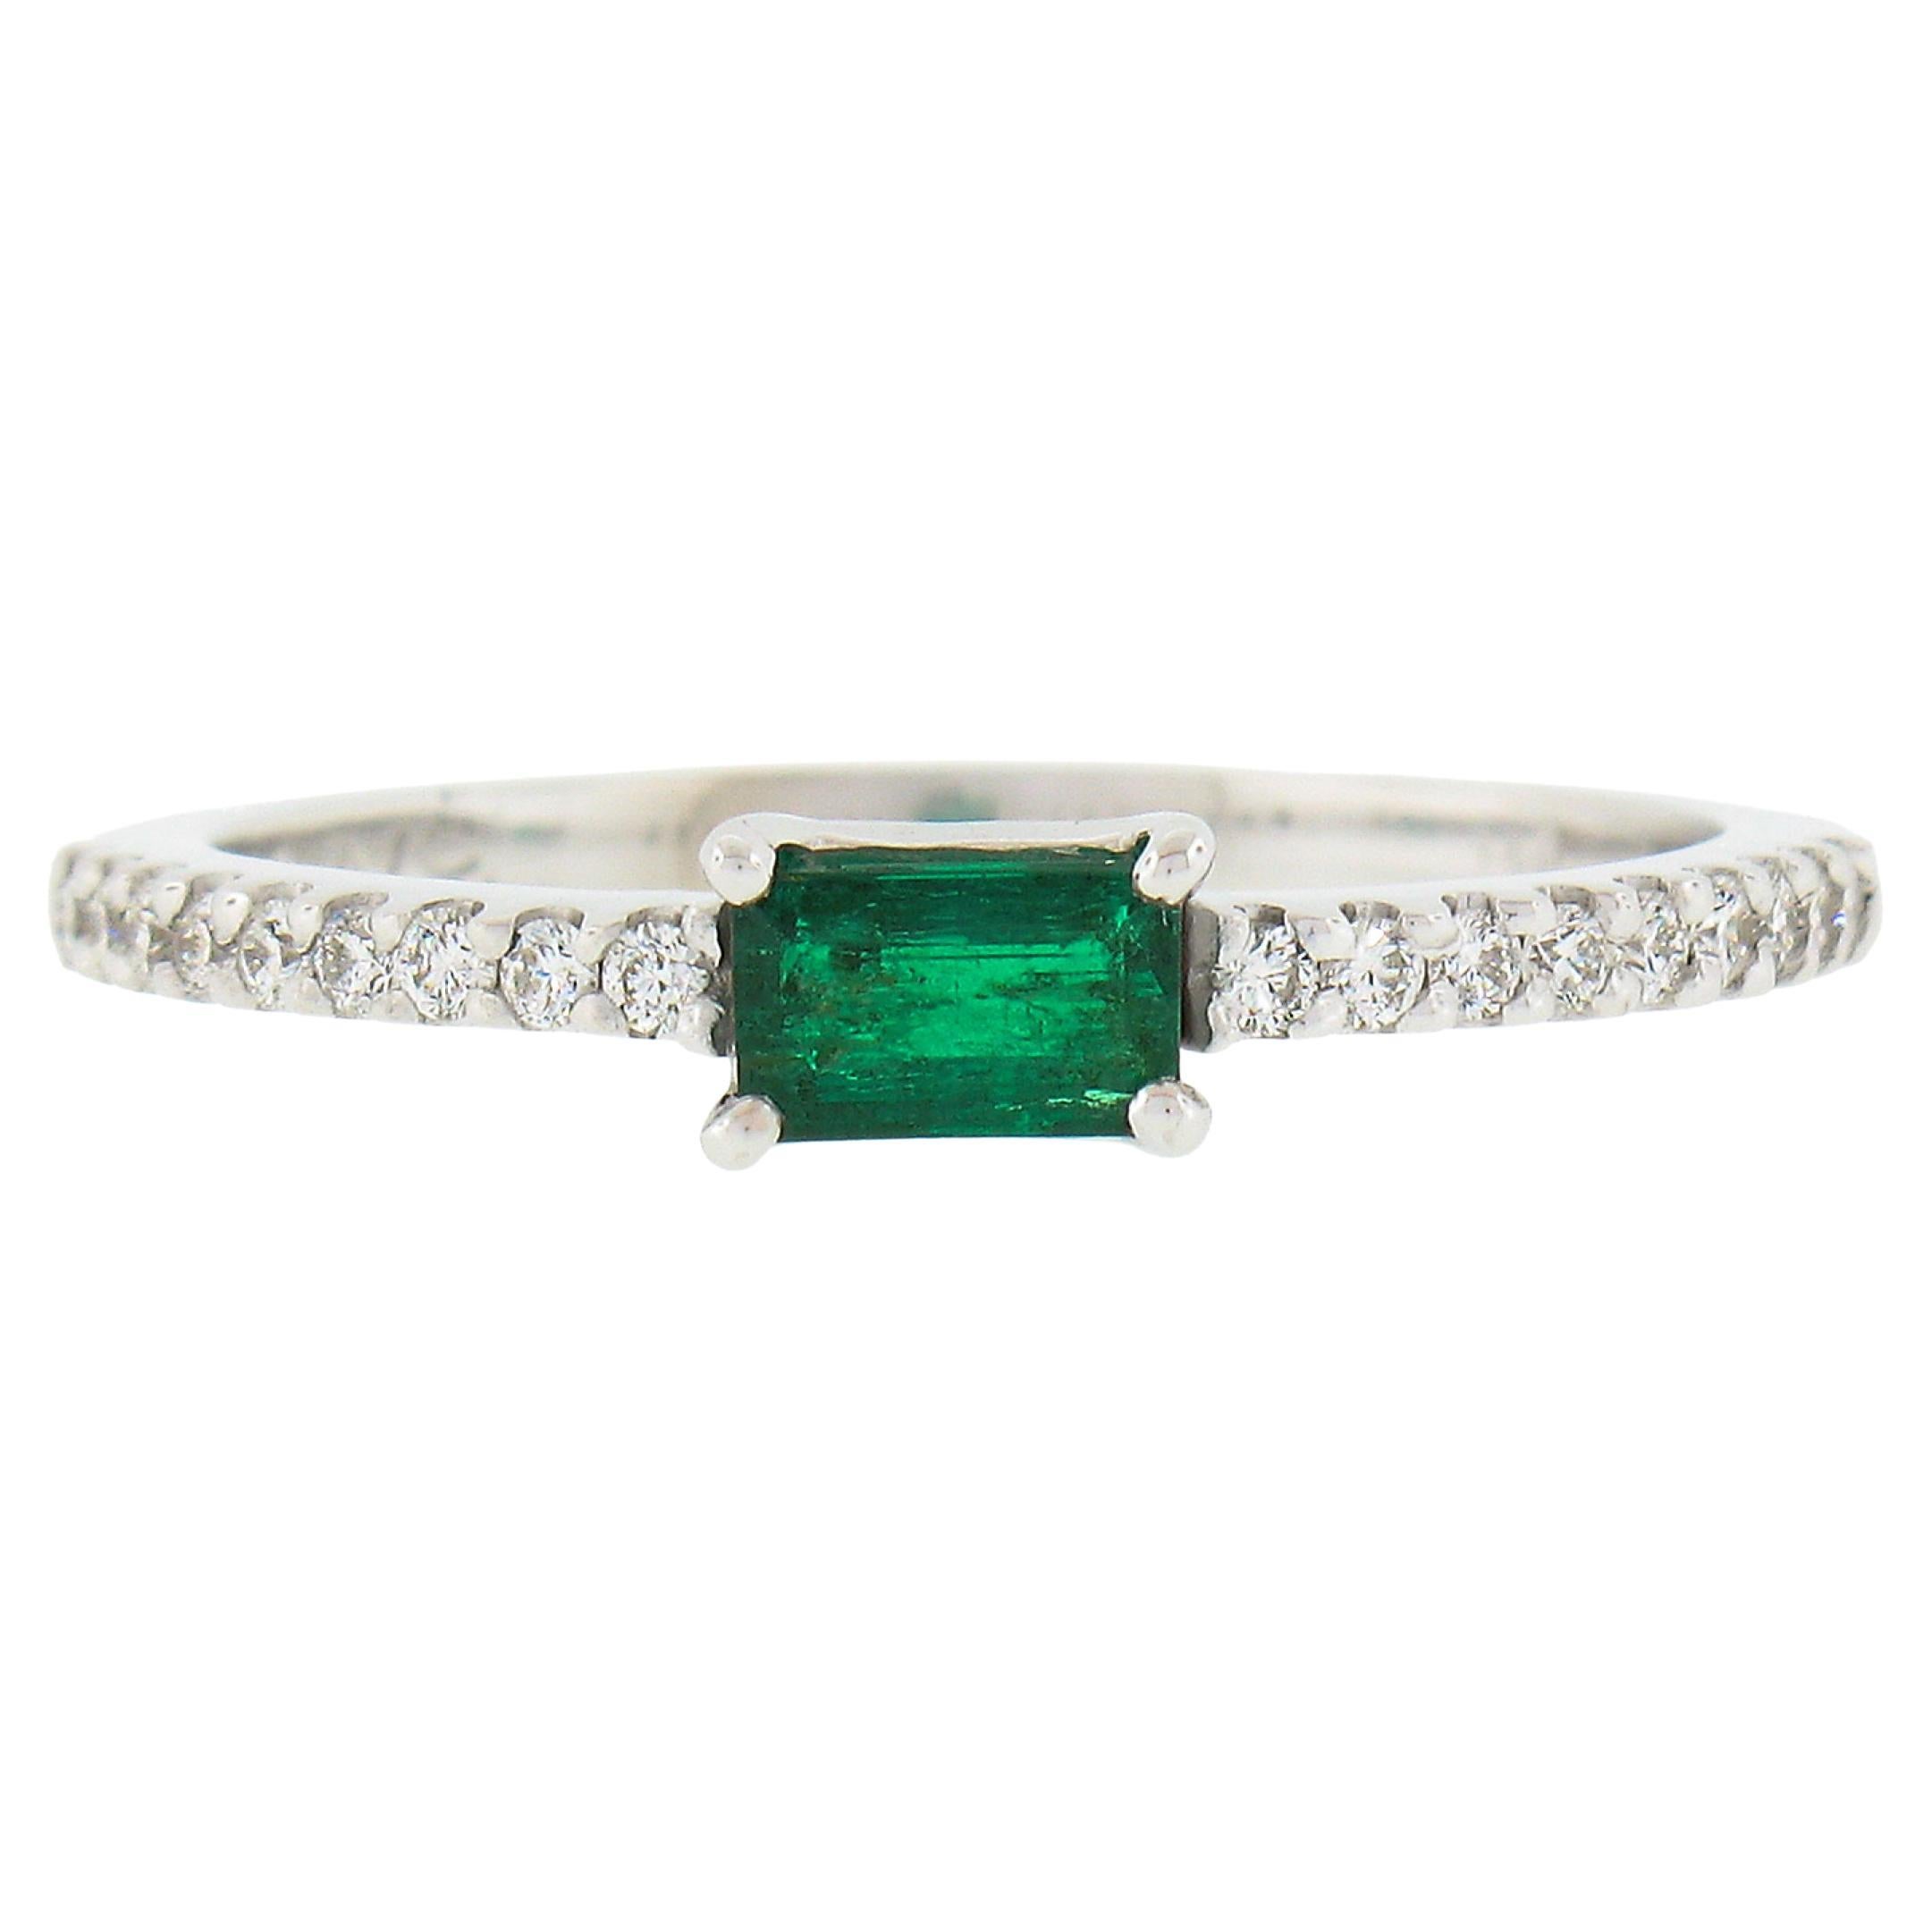 14k White Gold 0.44ctw Emerald & Diamond Sideways Engagement Stackable Band Ring